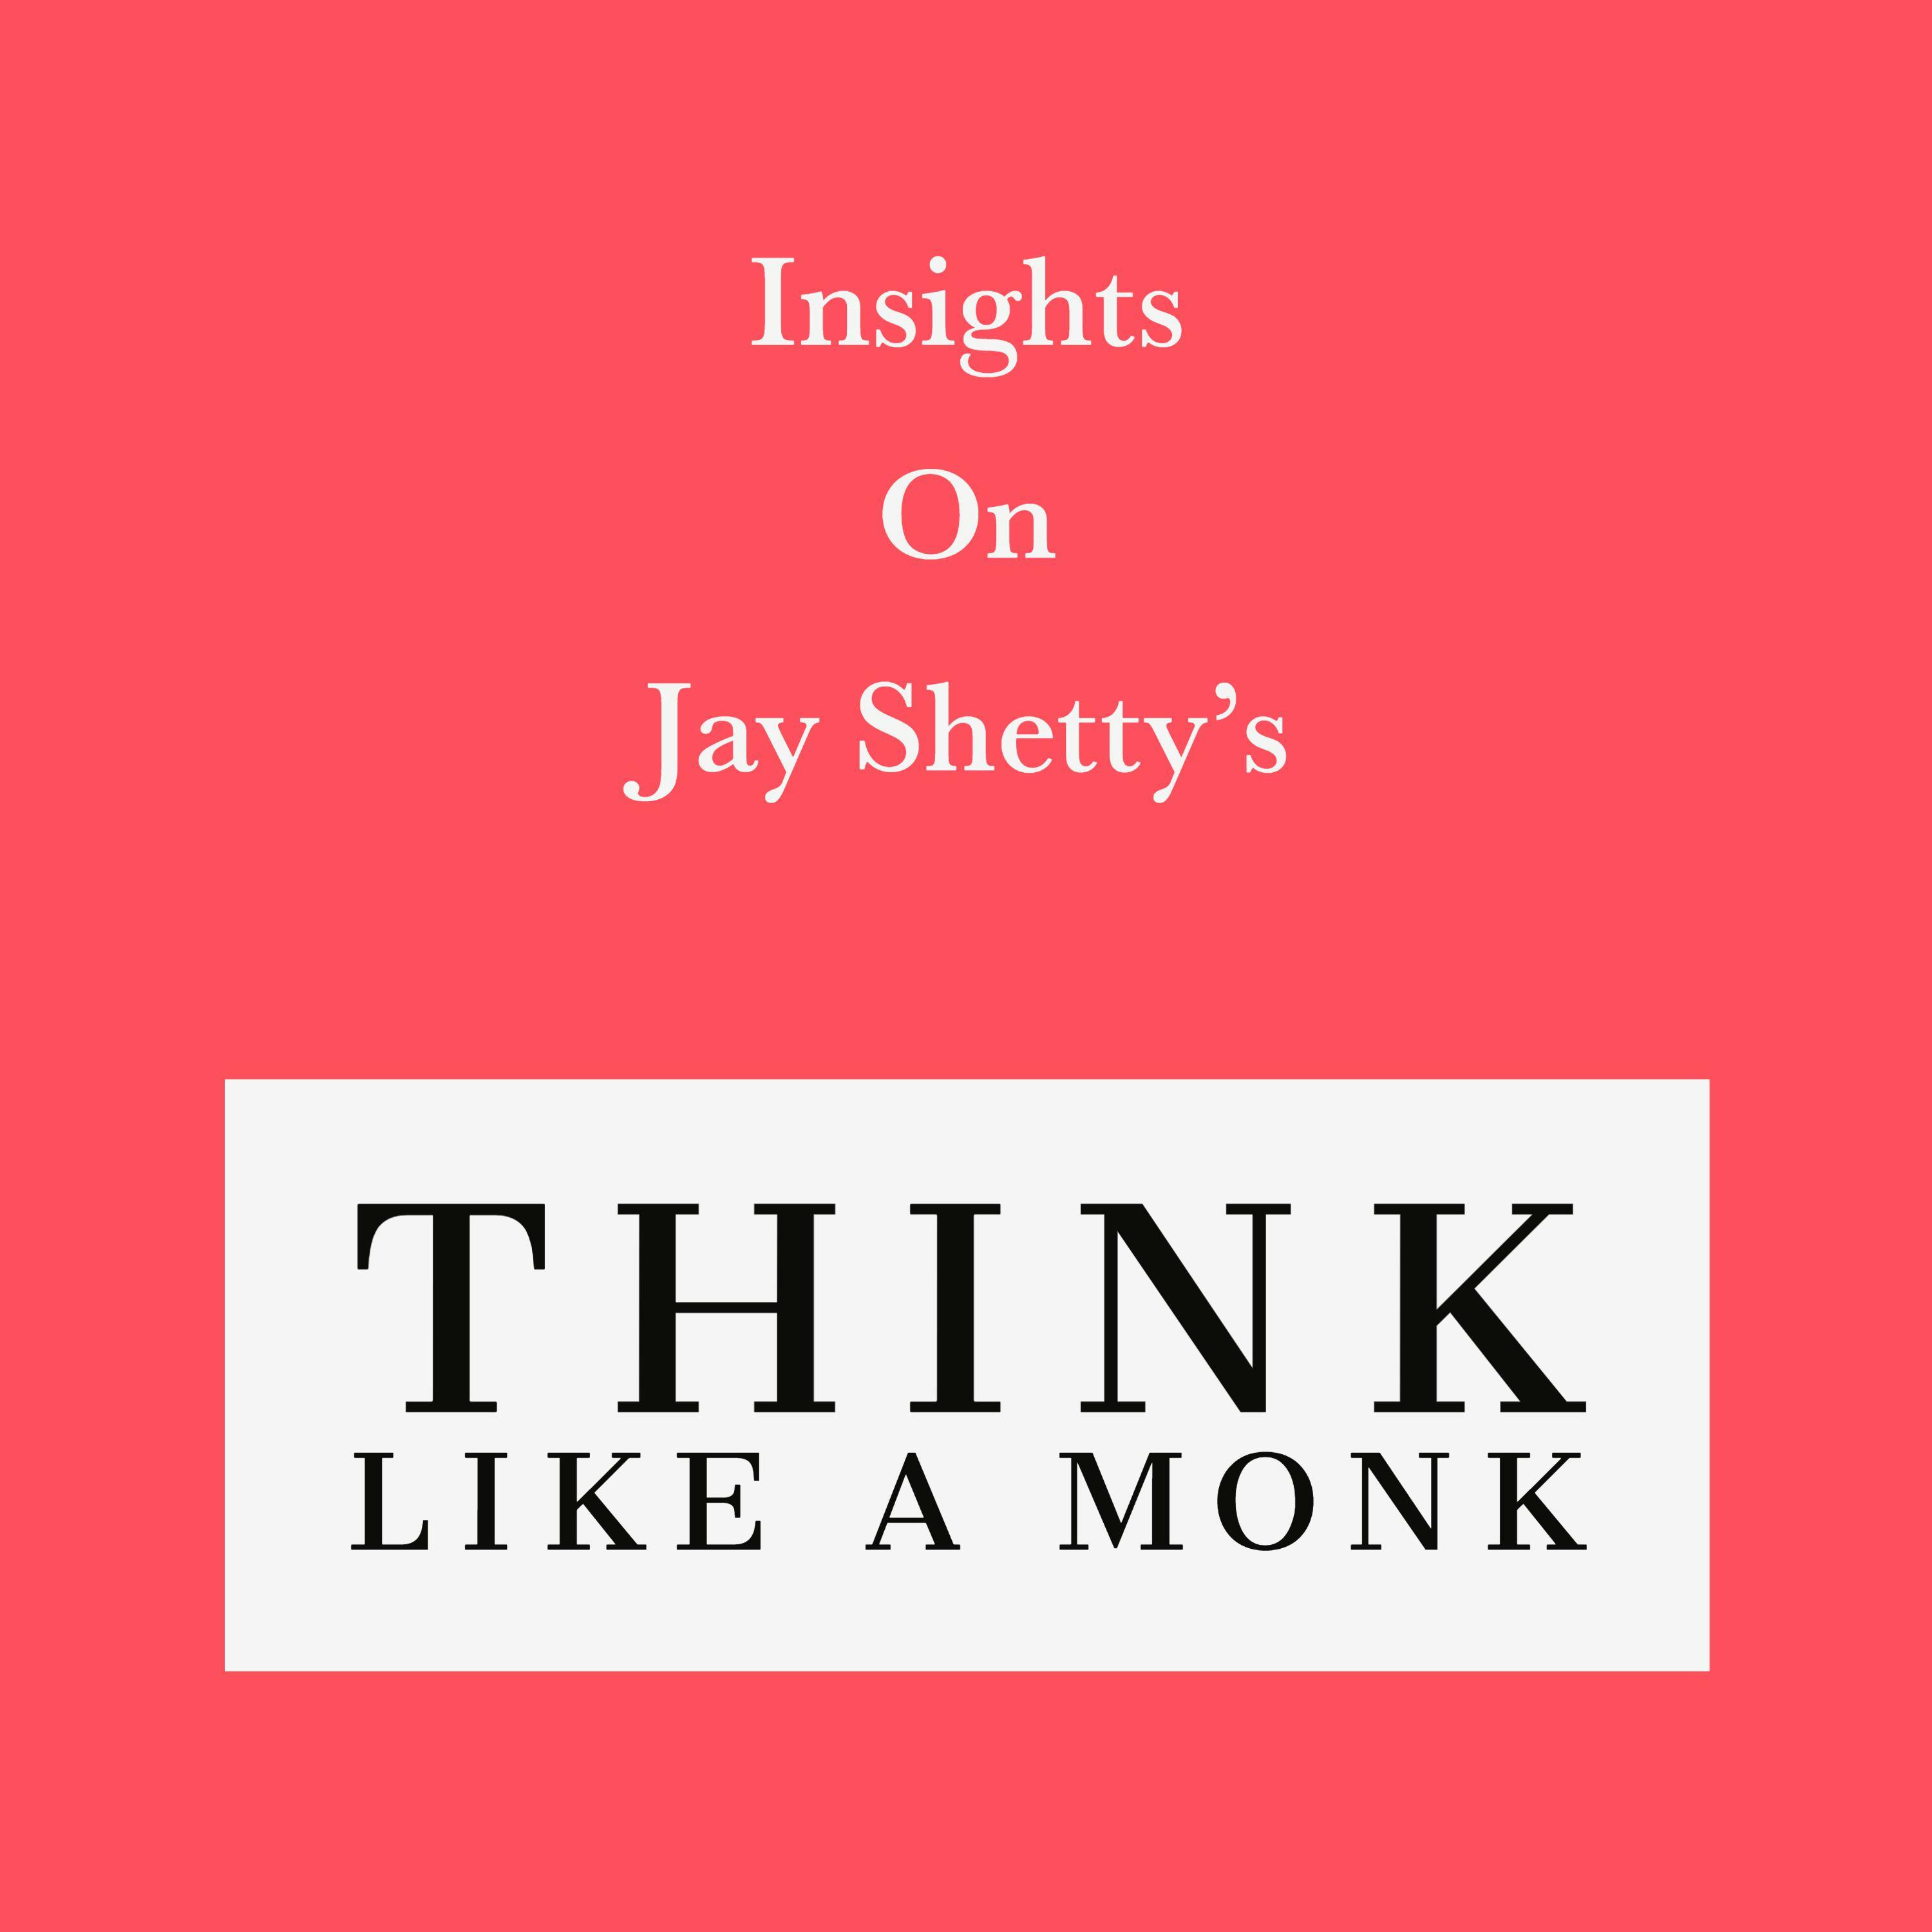 Insights on Jay Shetty’s Think like a Monk - undefined